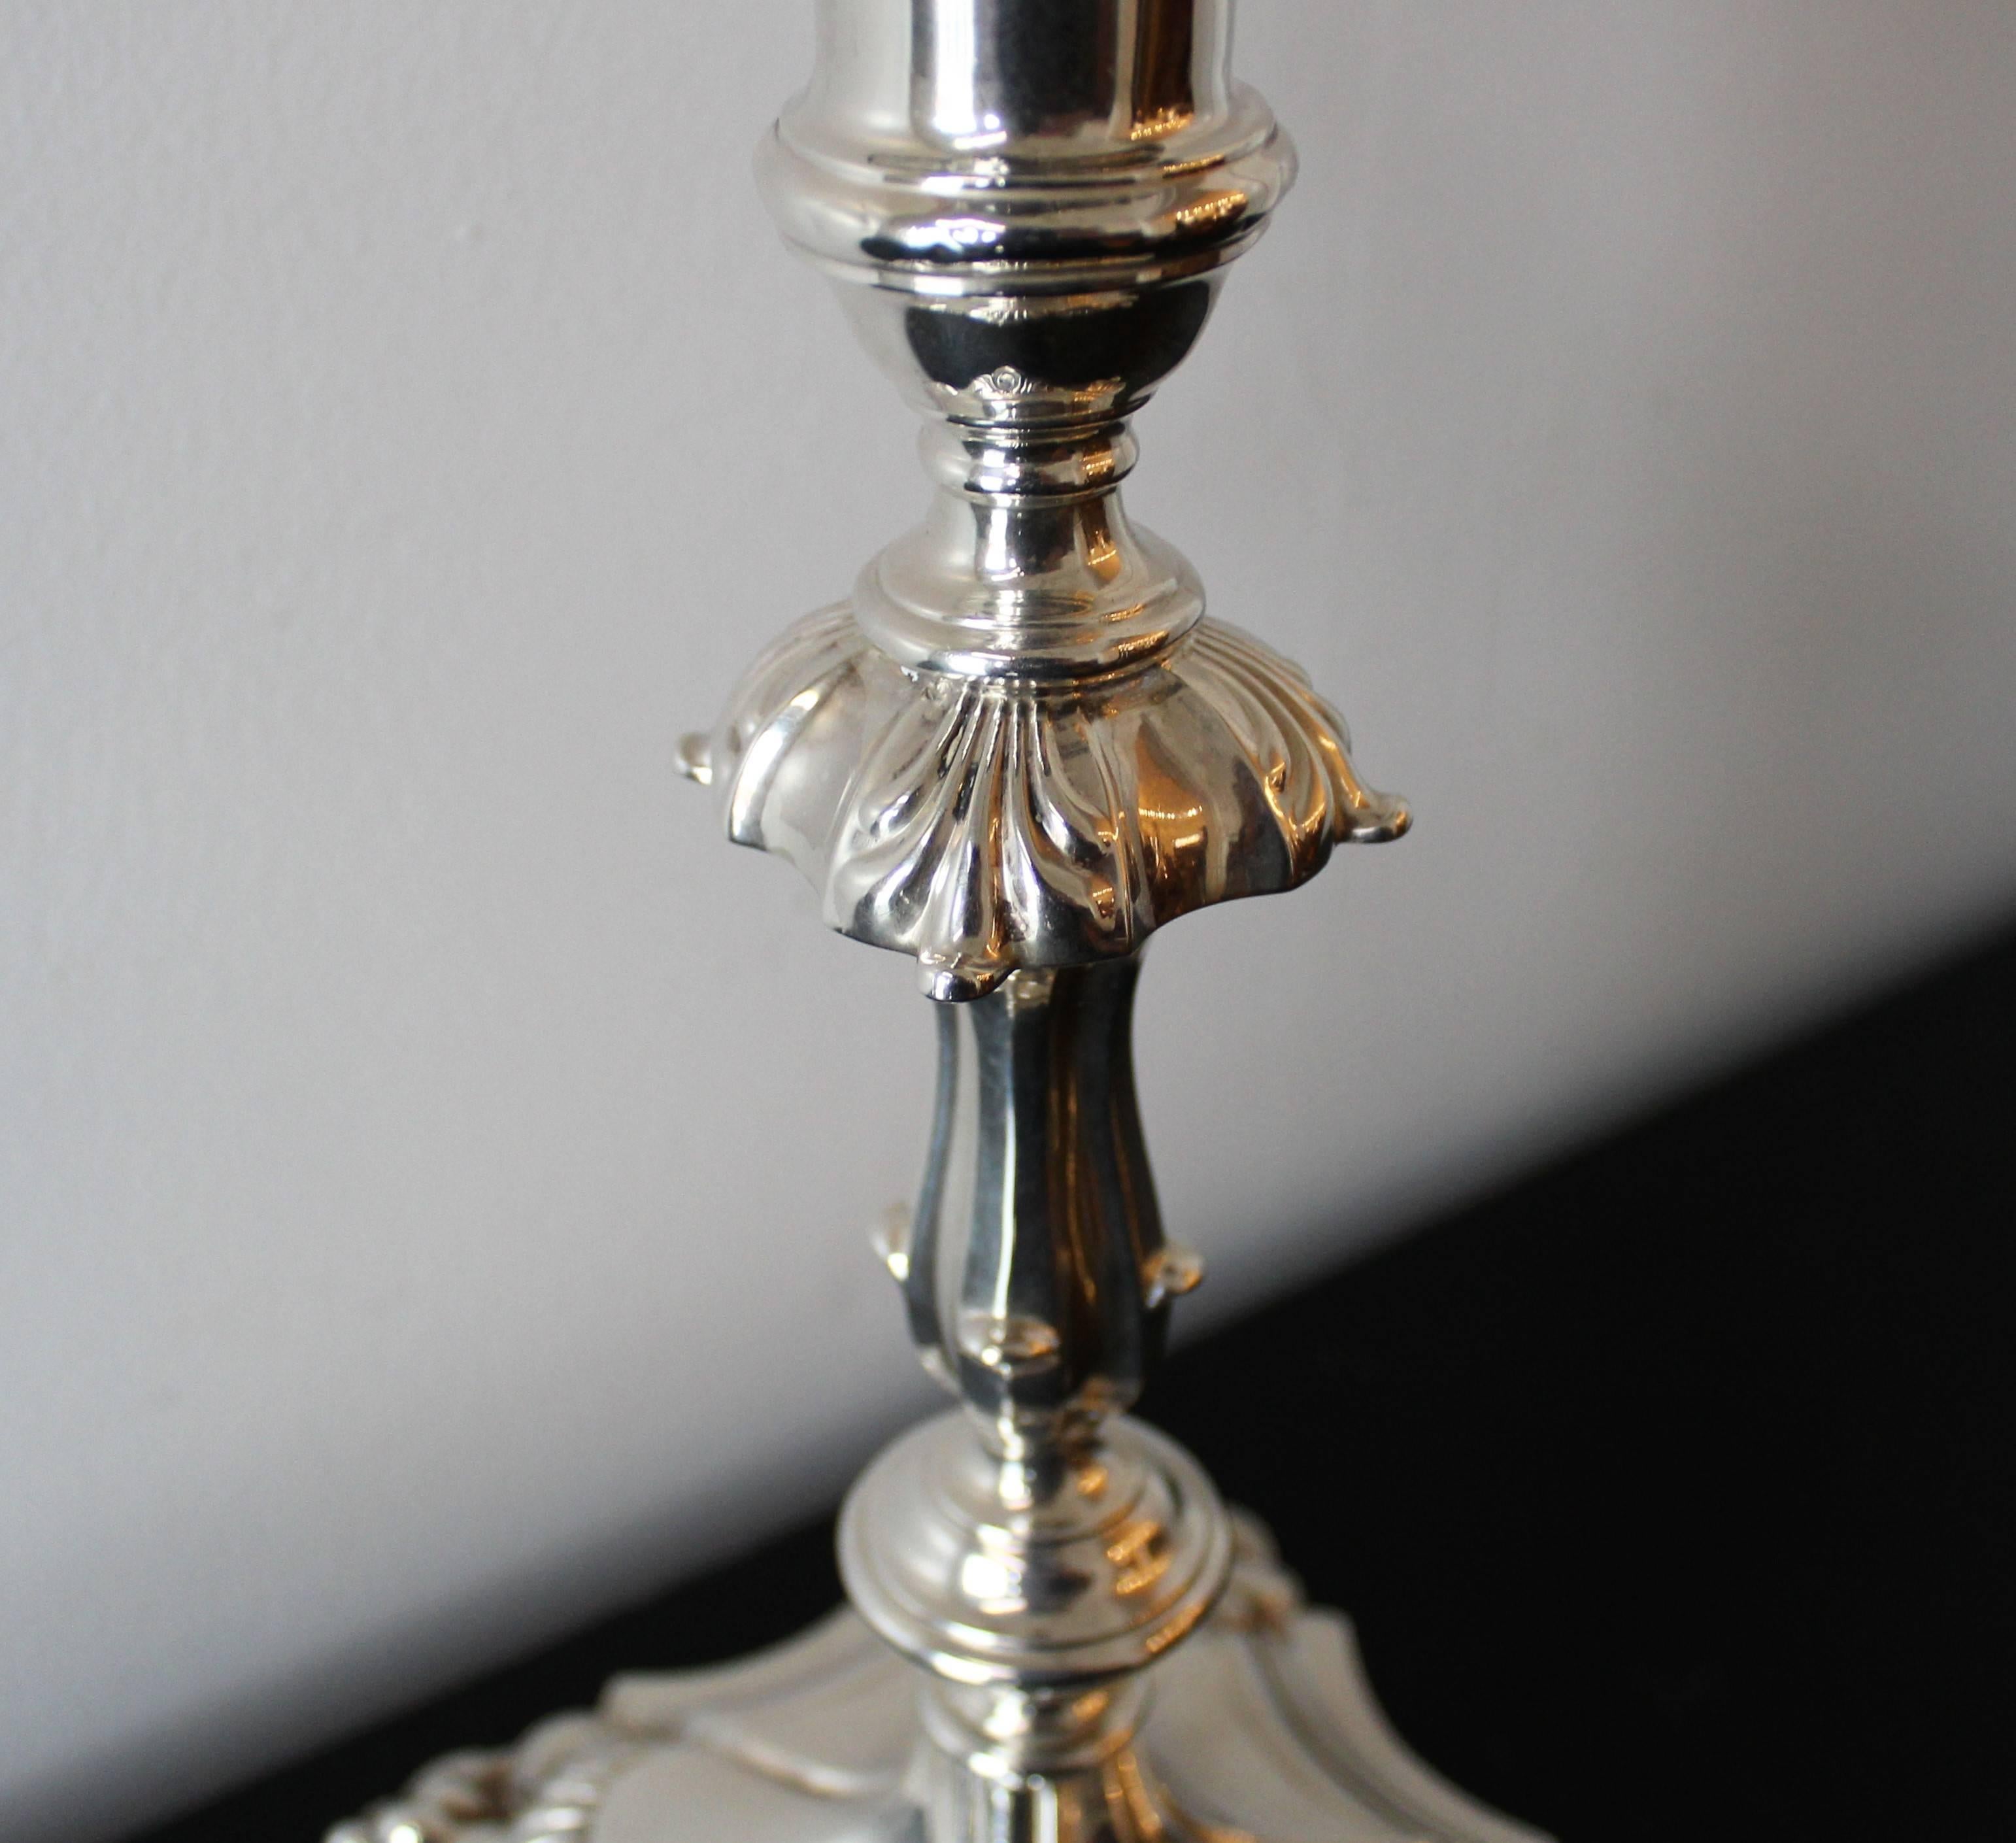 British Pair of Edwardian English Sterling Silver Candlesticks by Hawksworth, Eyre & Co.